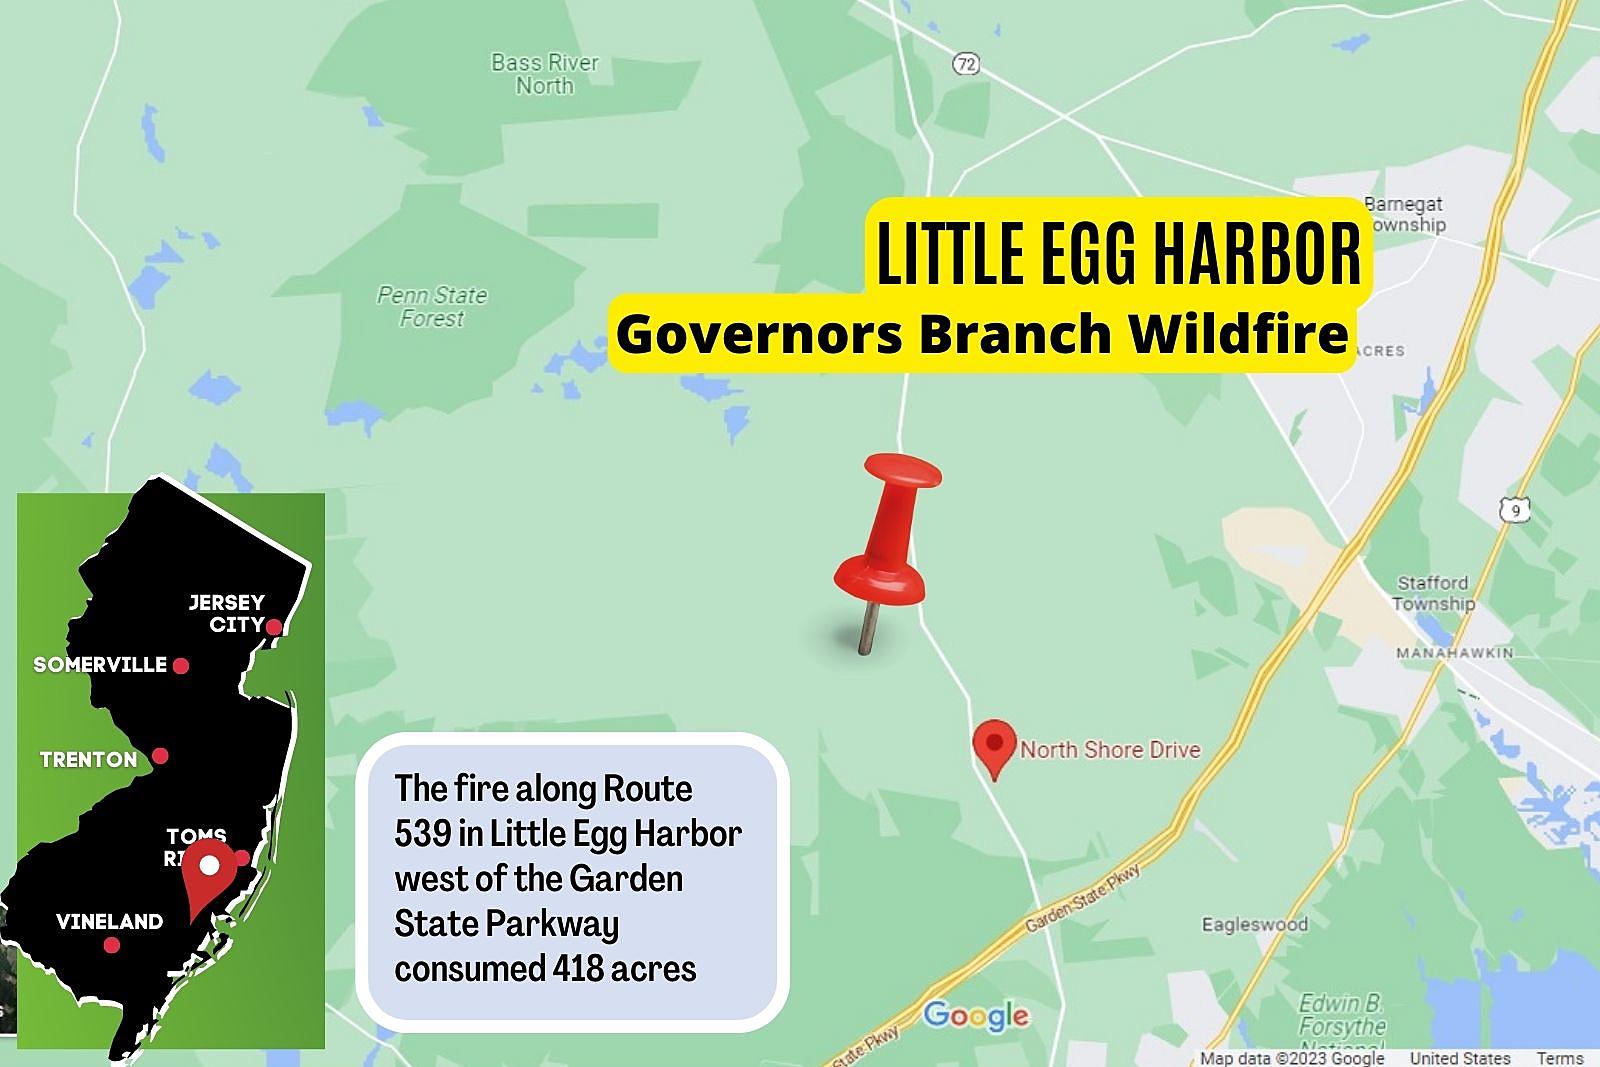 Wind-blown wildfire in Little Egg Harbor, NJ now 100% contained